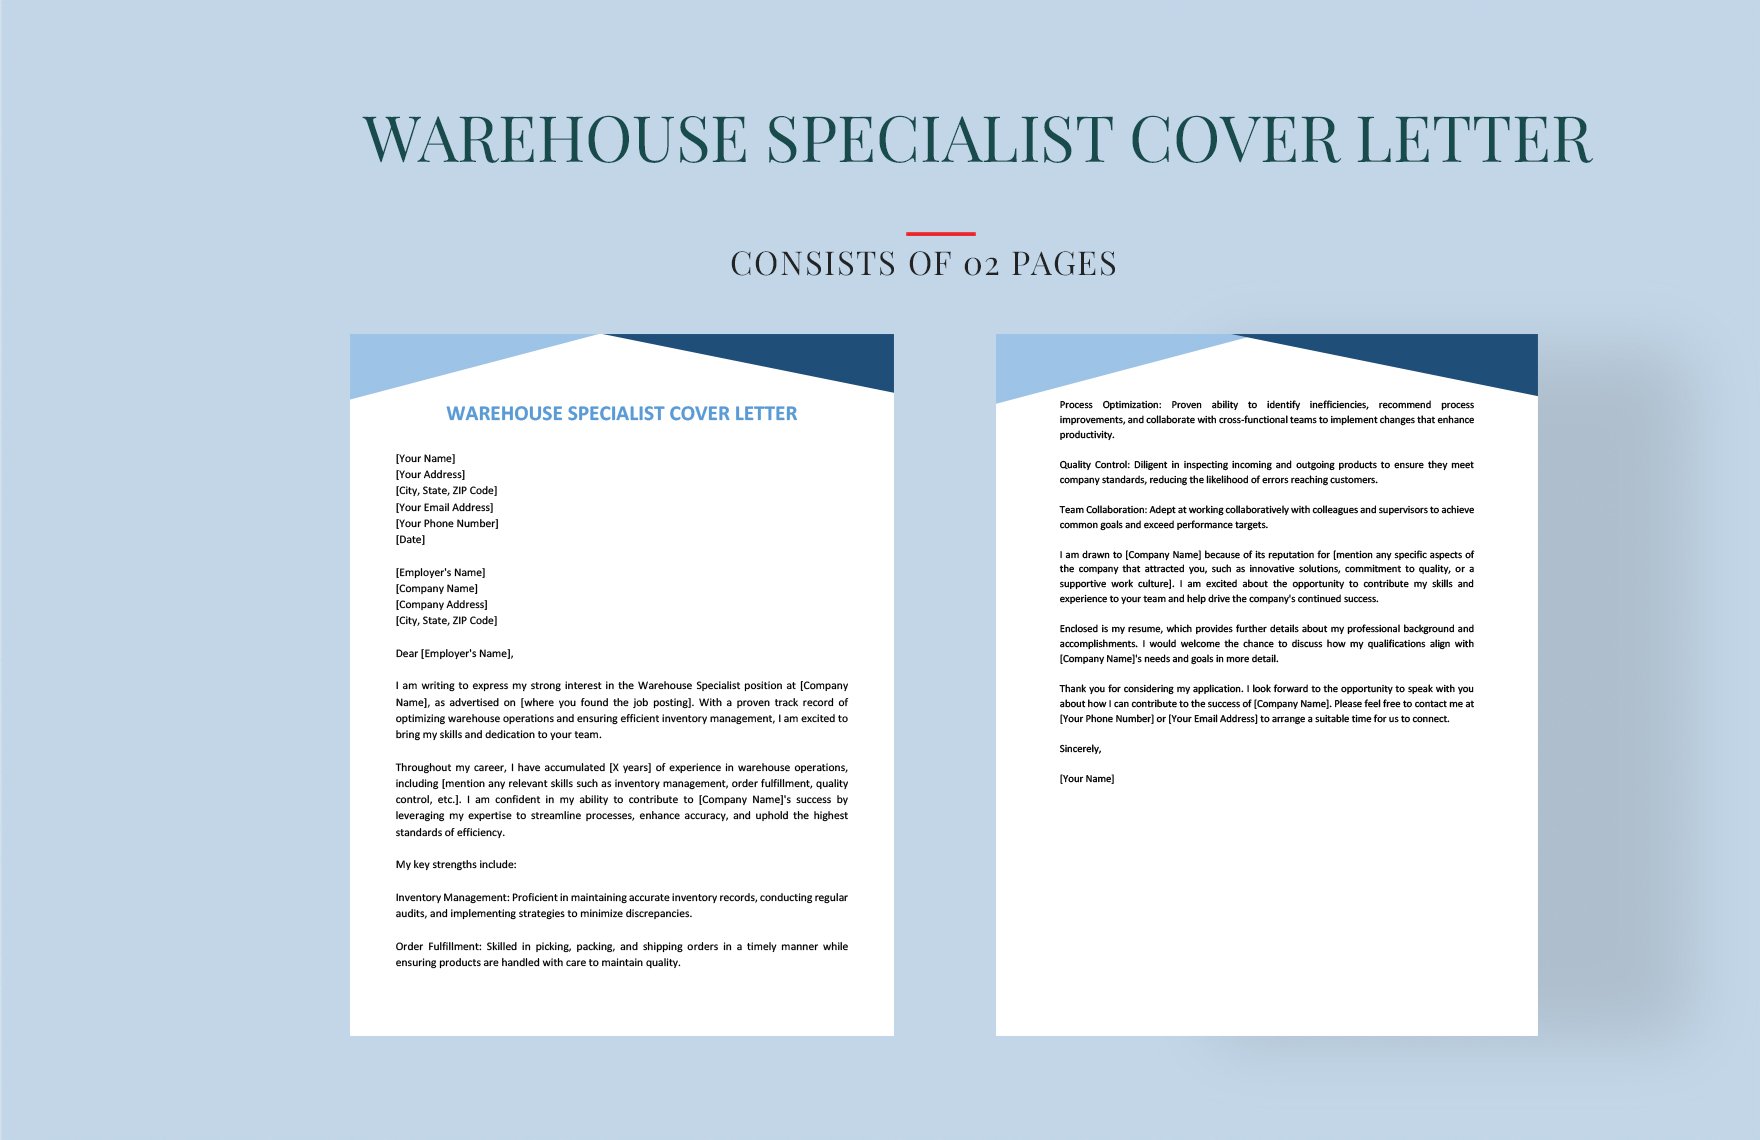 Warehouse Specialist Cover Letter in Word, Google Docs, PDF